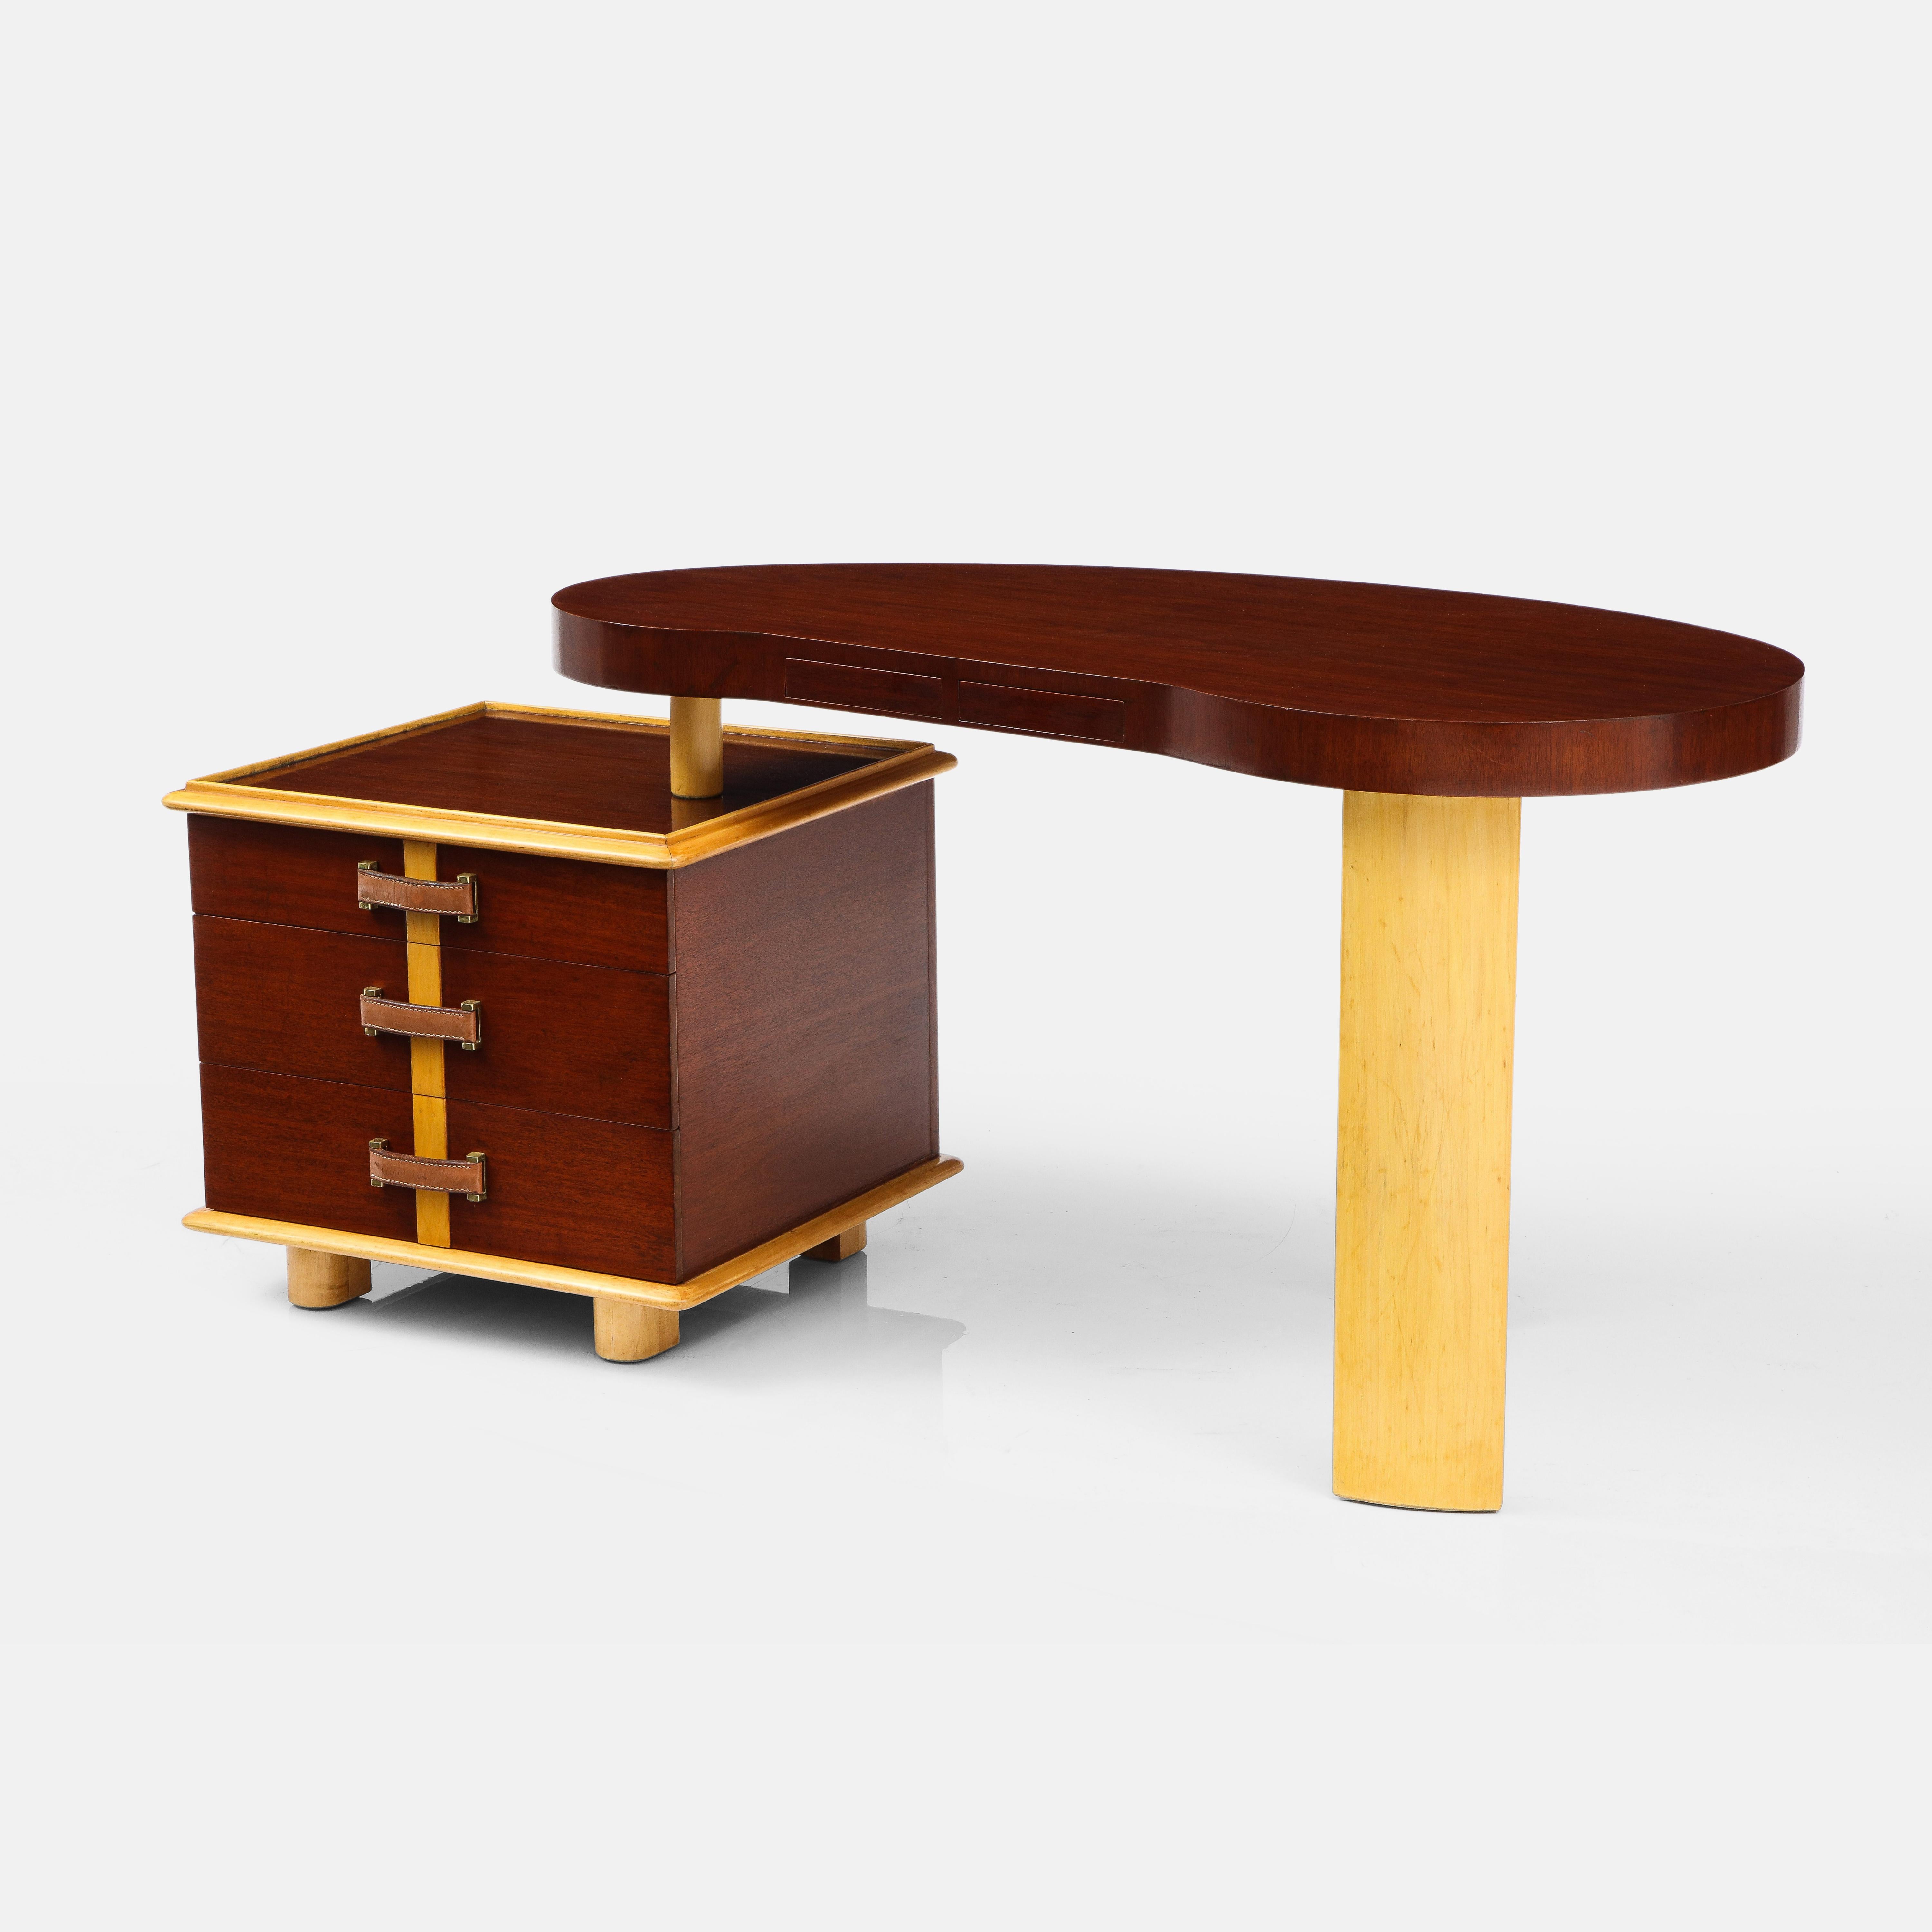 Mid-Century Modern Paul Frankl Rare Kidney Desk in Mahogany, Birch, Leather and Brass, USA, 1950s For Sale